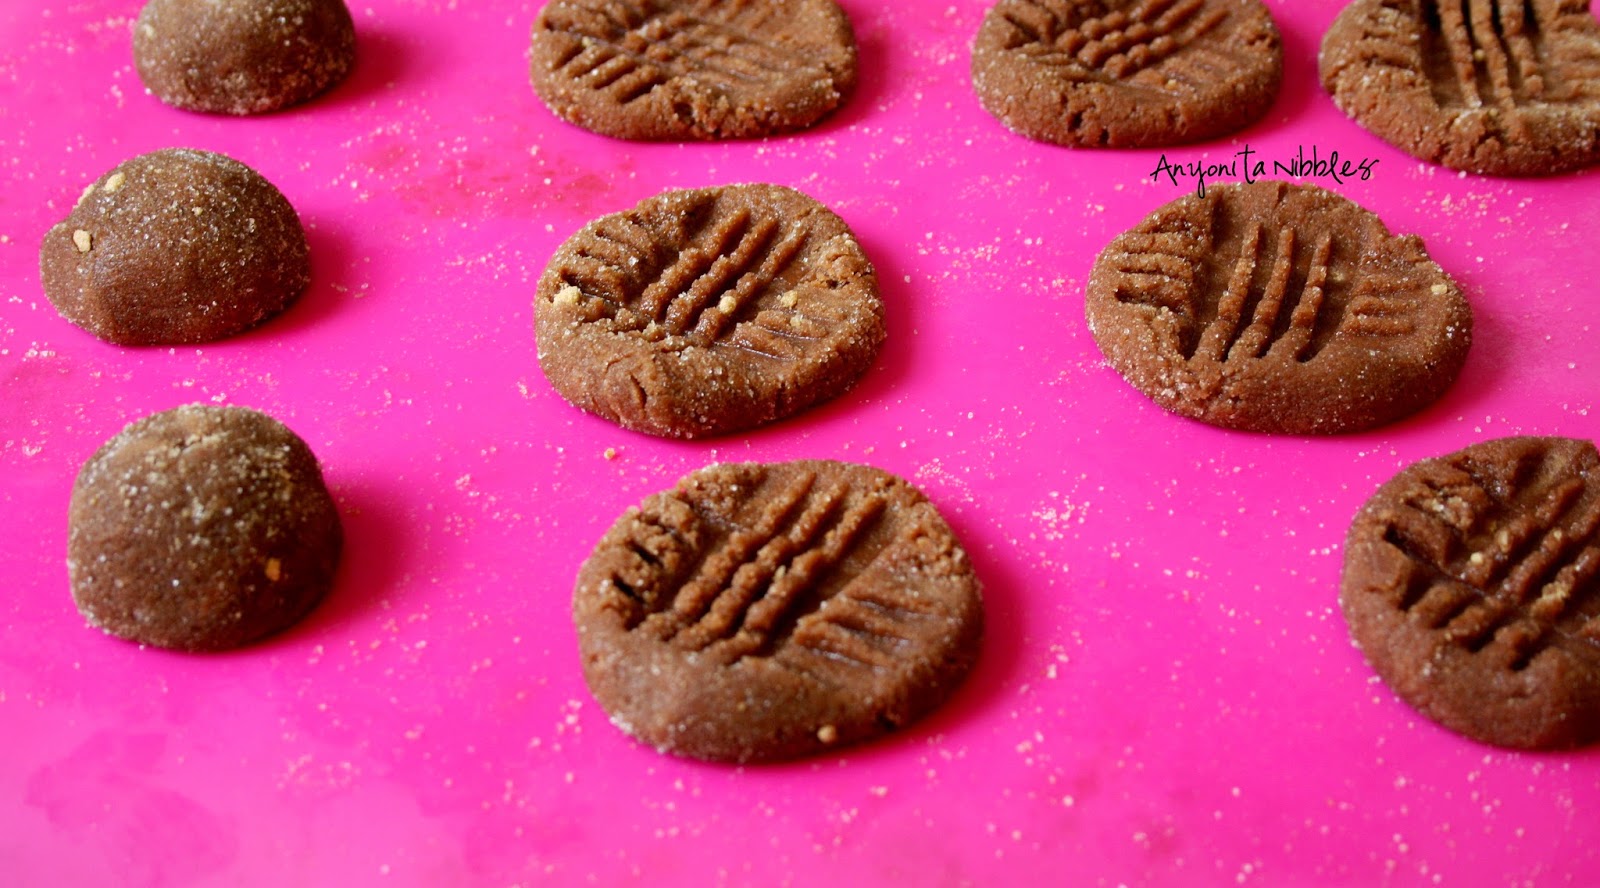 Peanut Butter Nutella Cookies before baking | Anyonita Nibbles